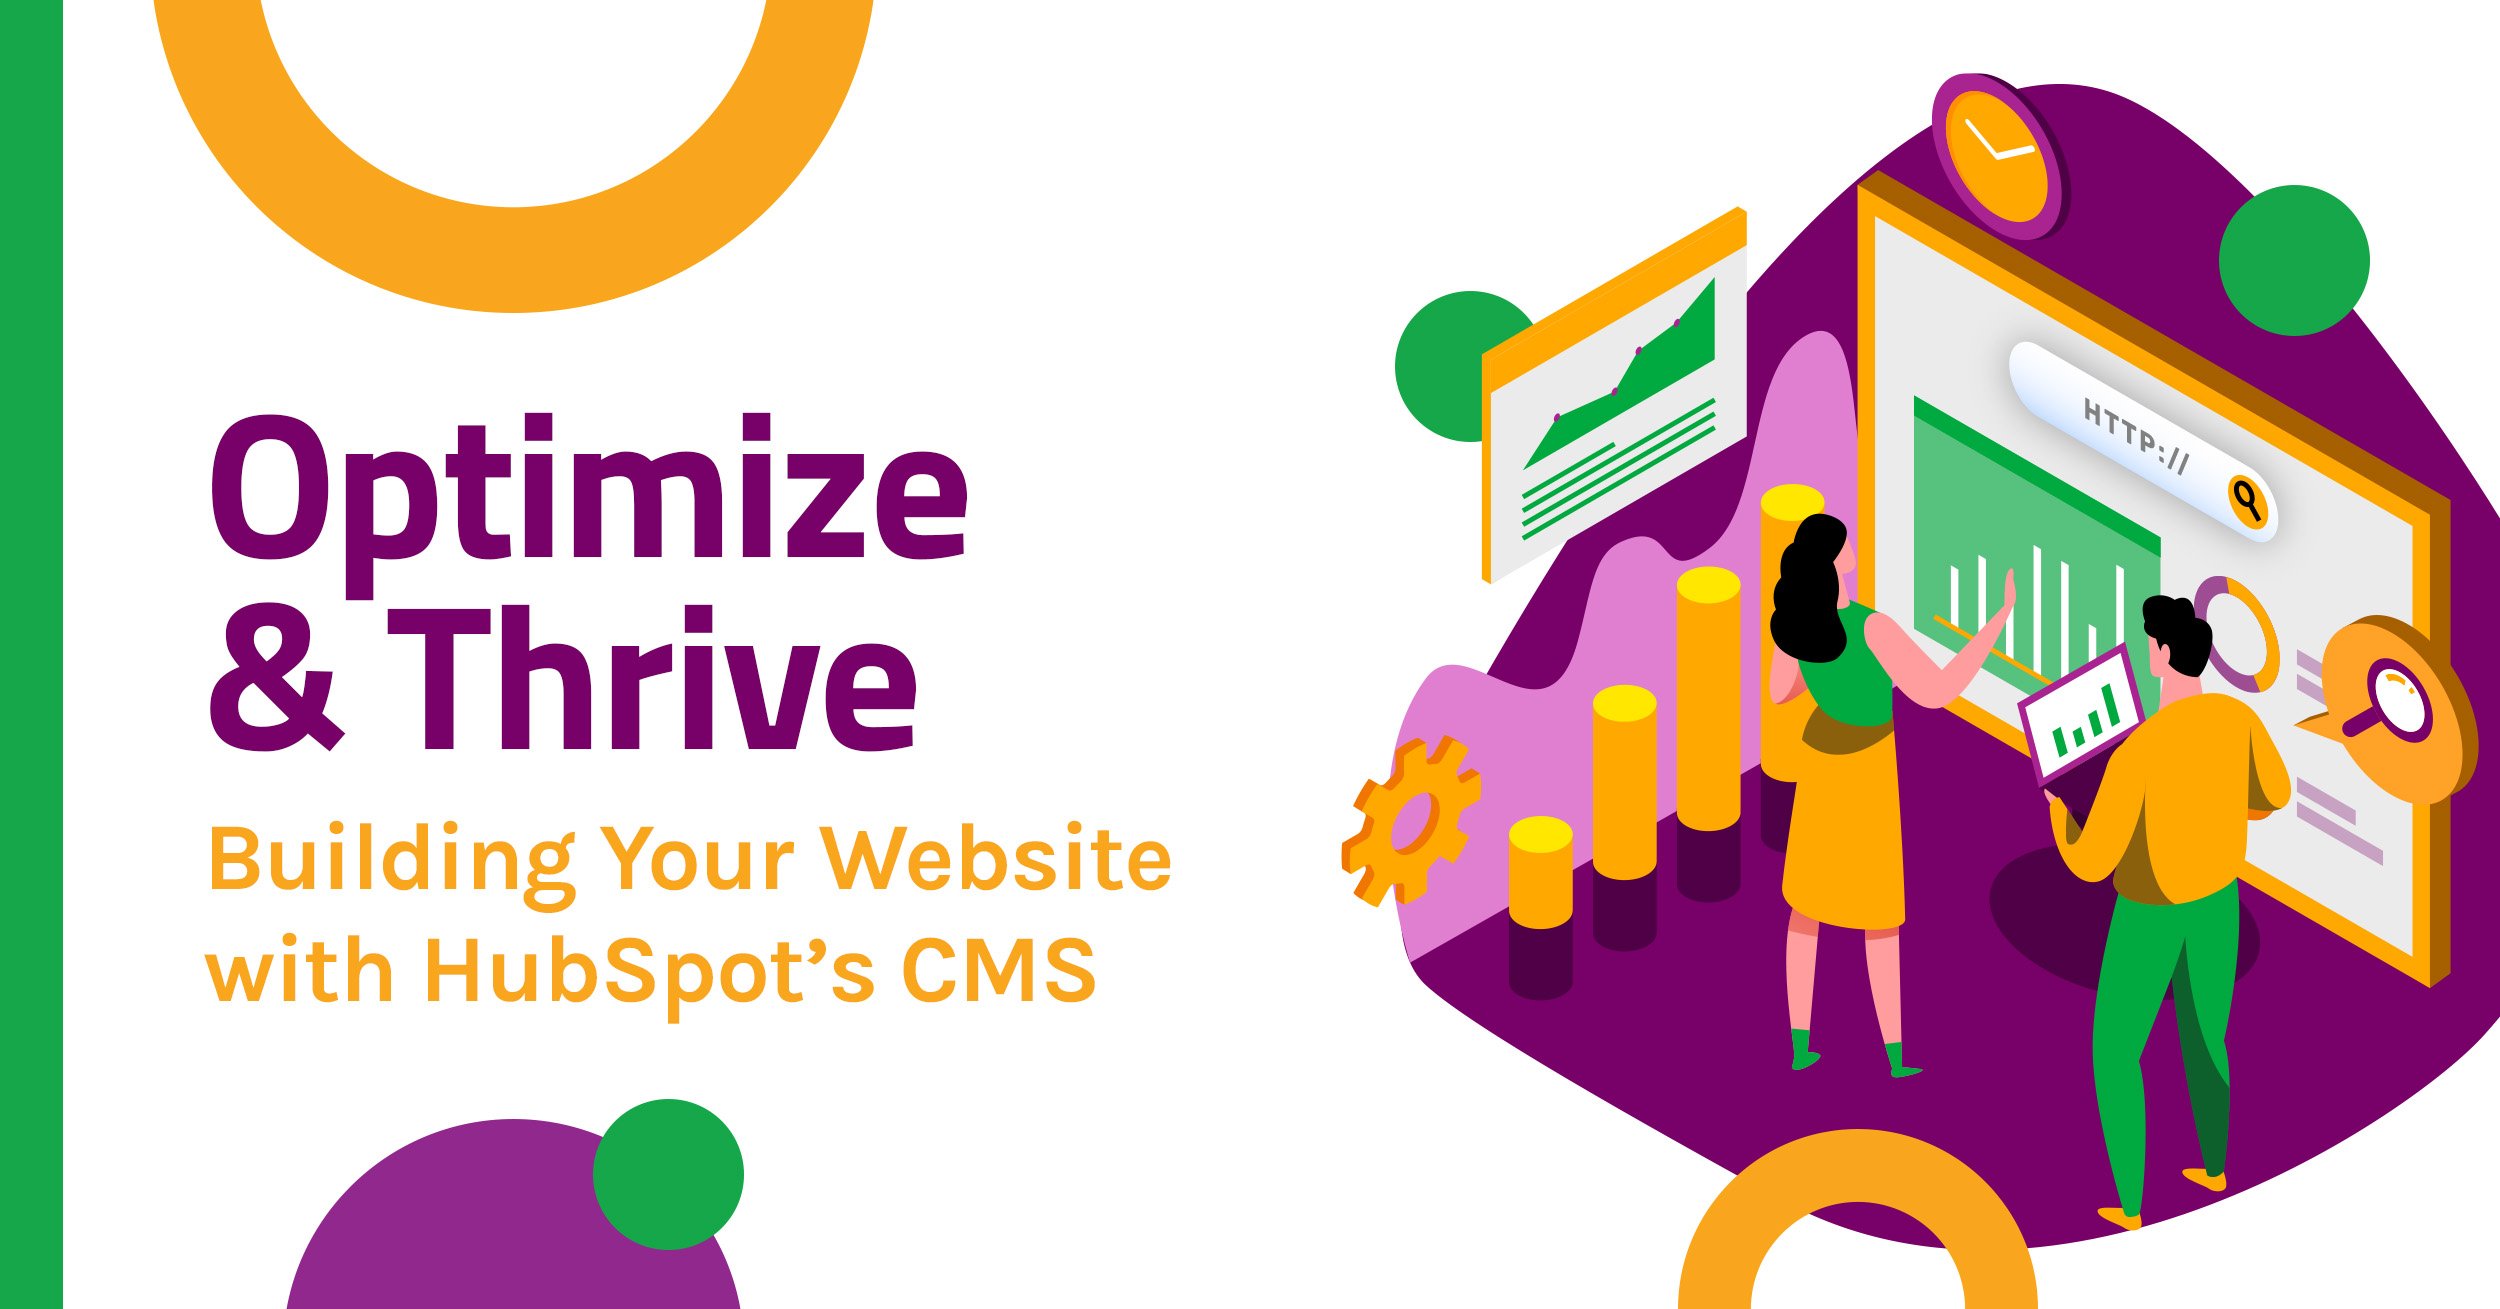 Optimize & Thrive Building Your Website with HubSpot’s CMS